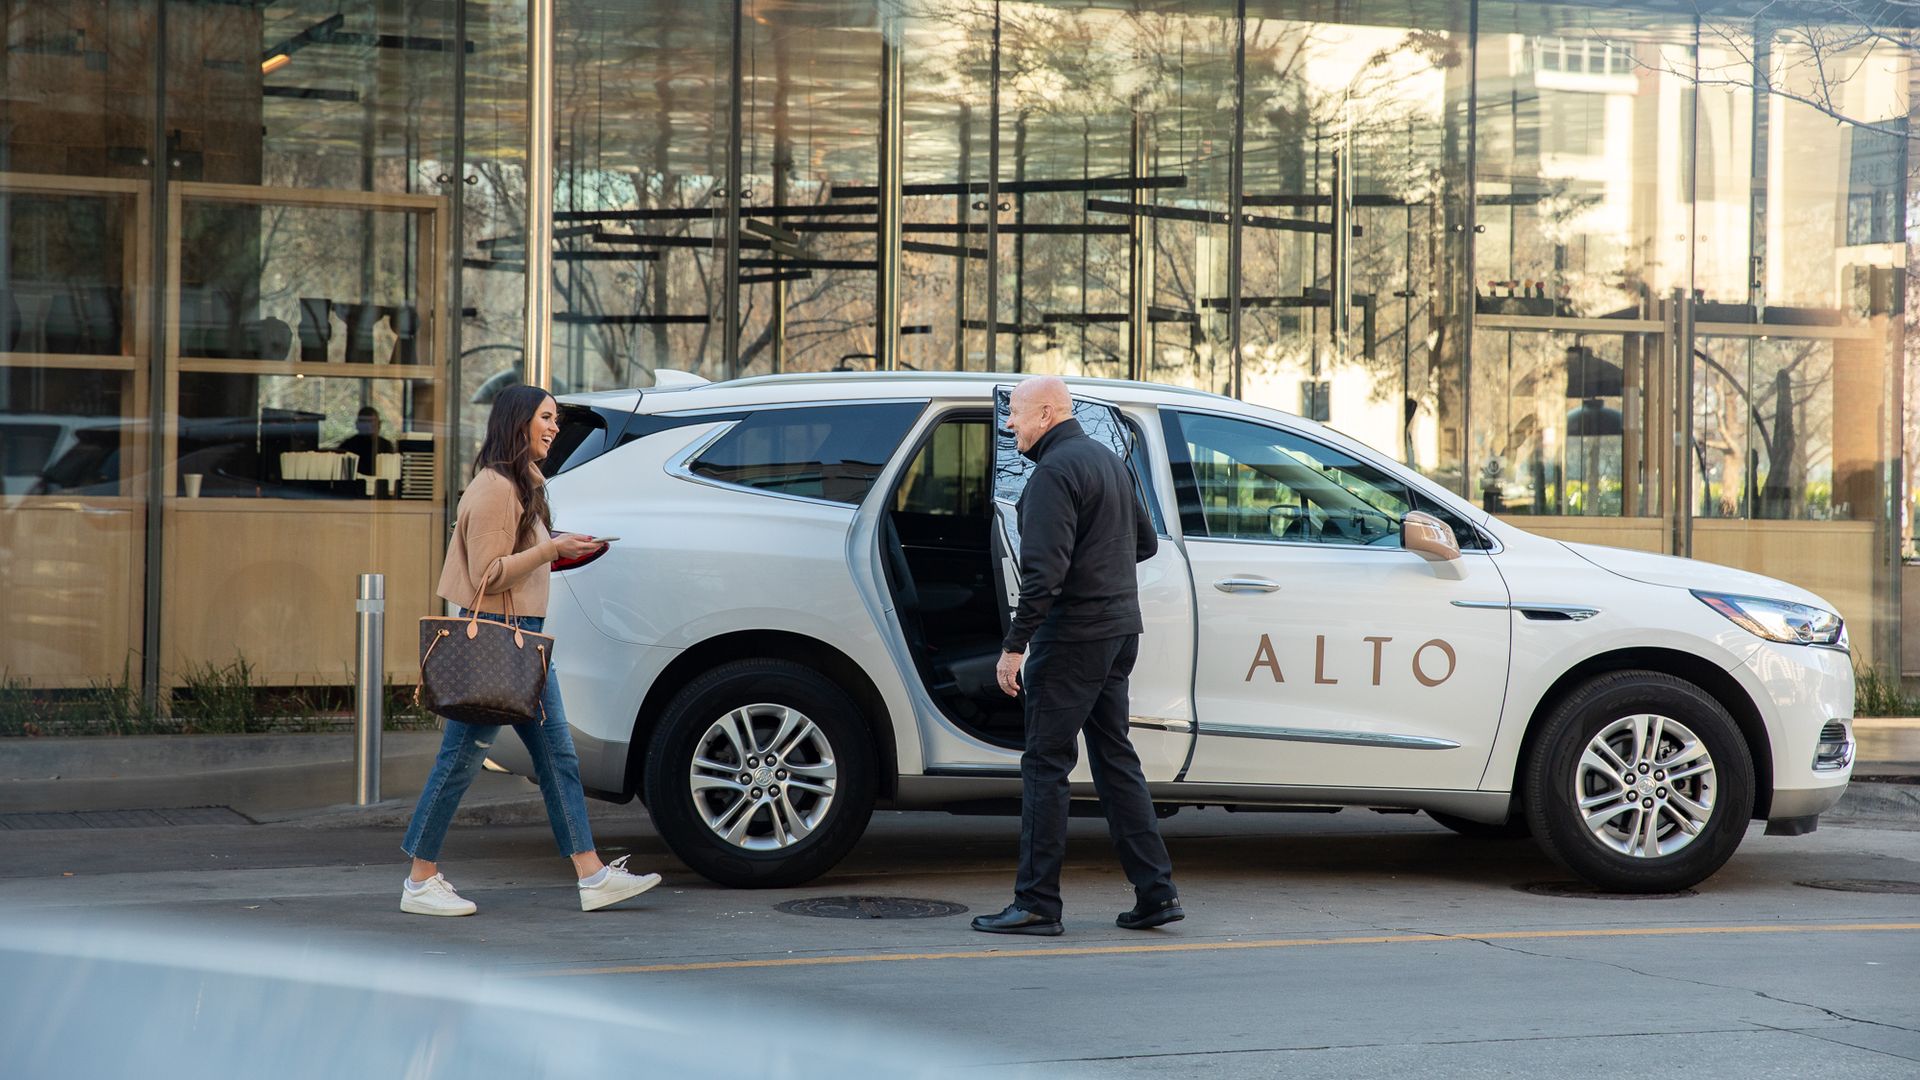 Driver holds door open to car that reads "Alto"